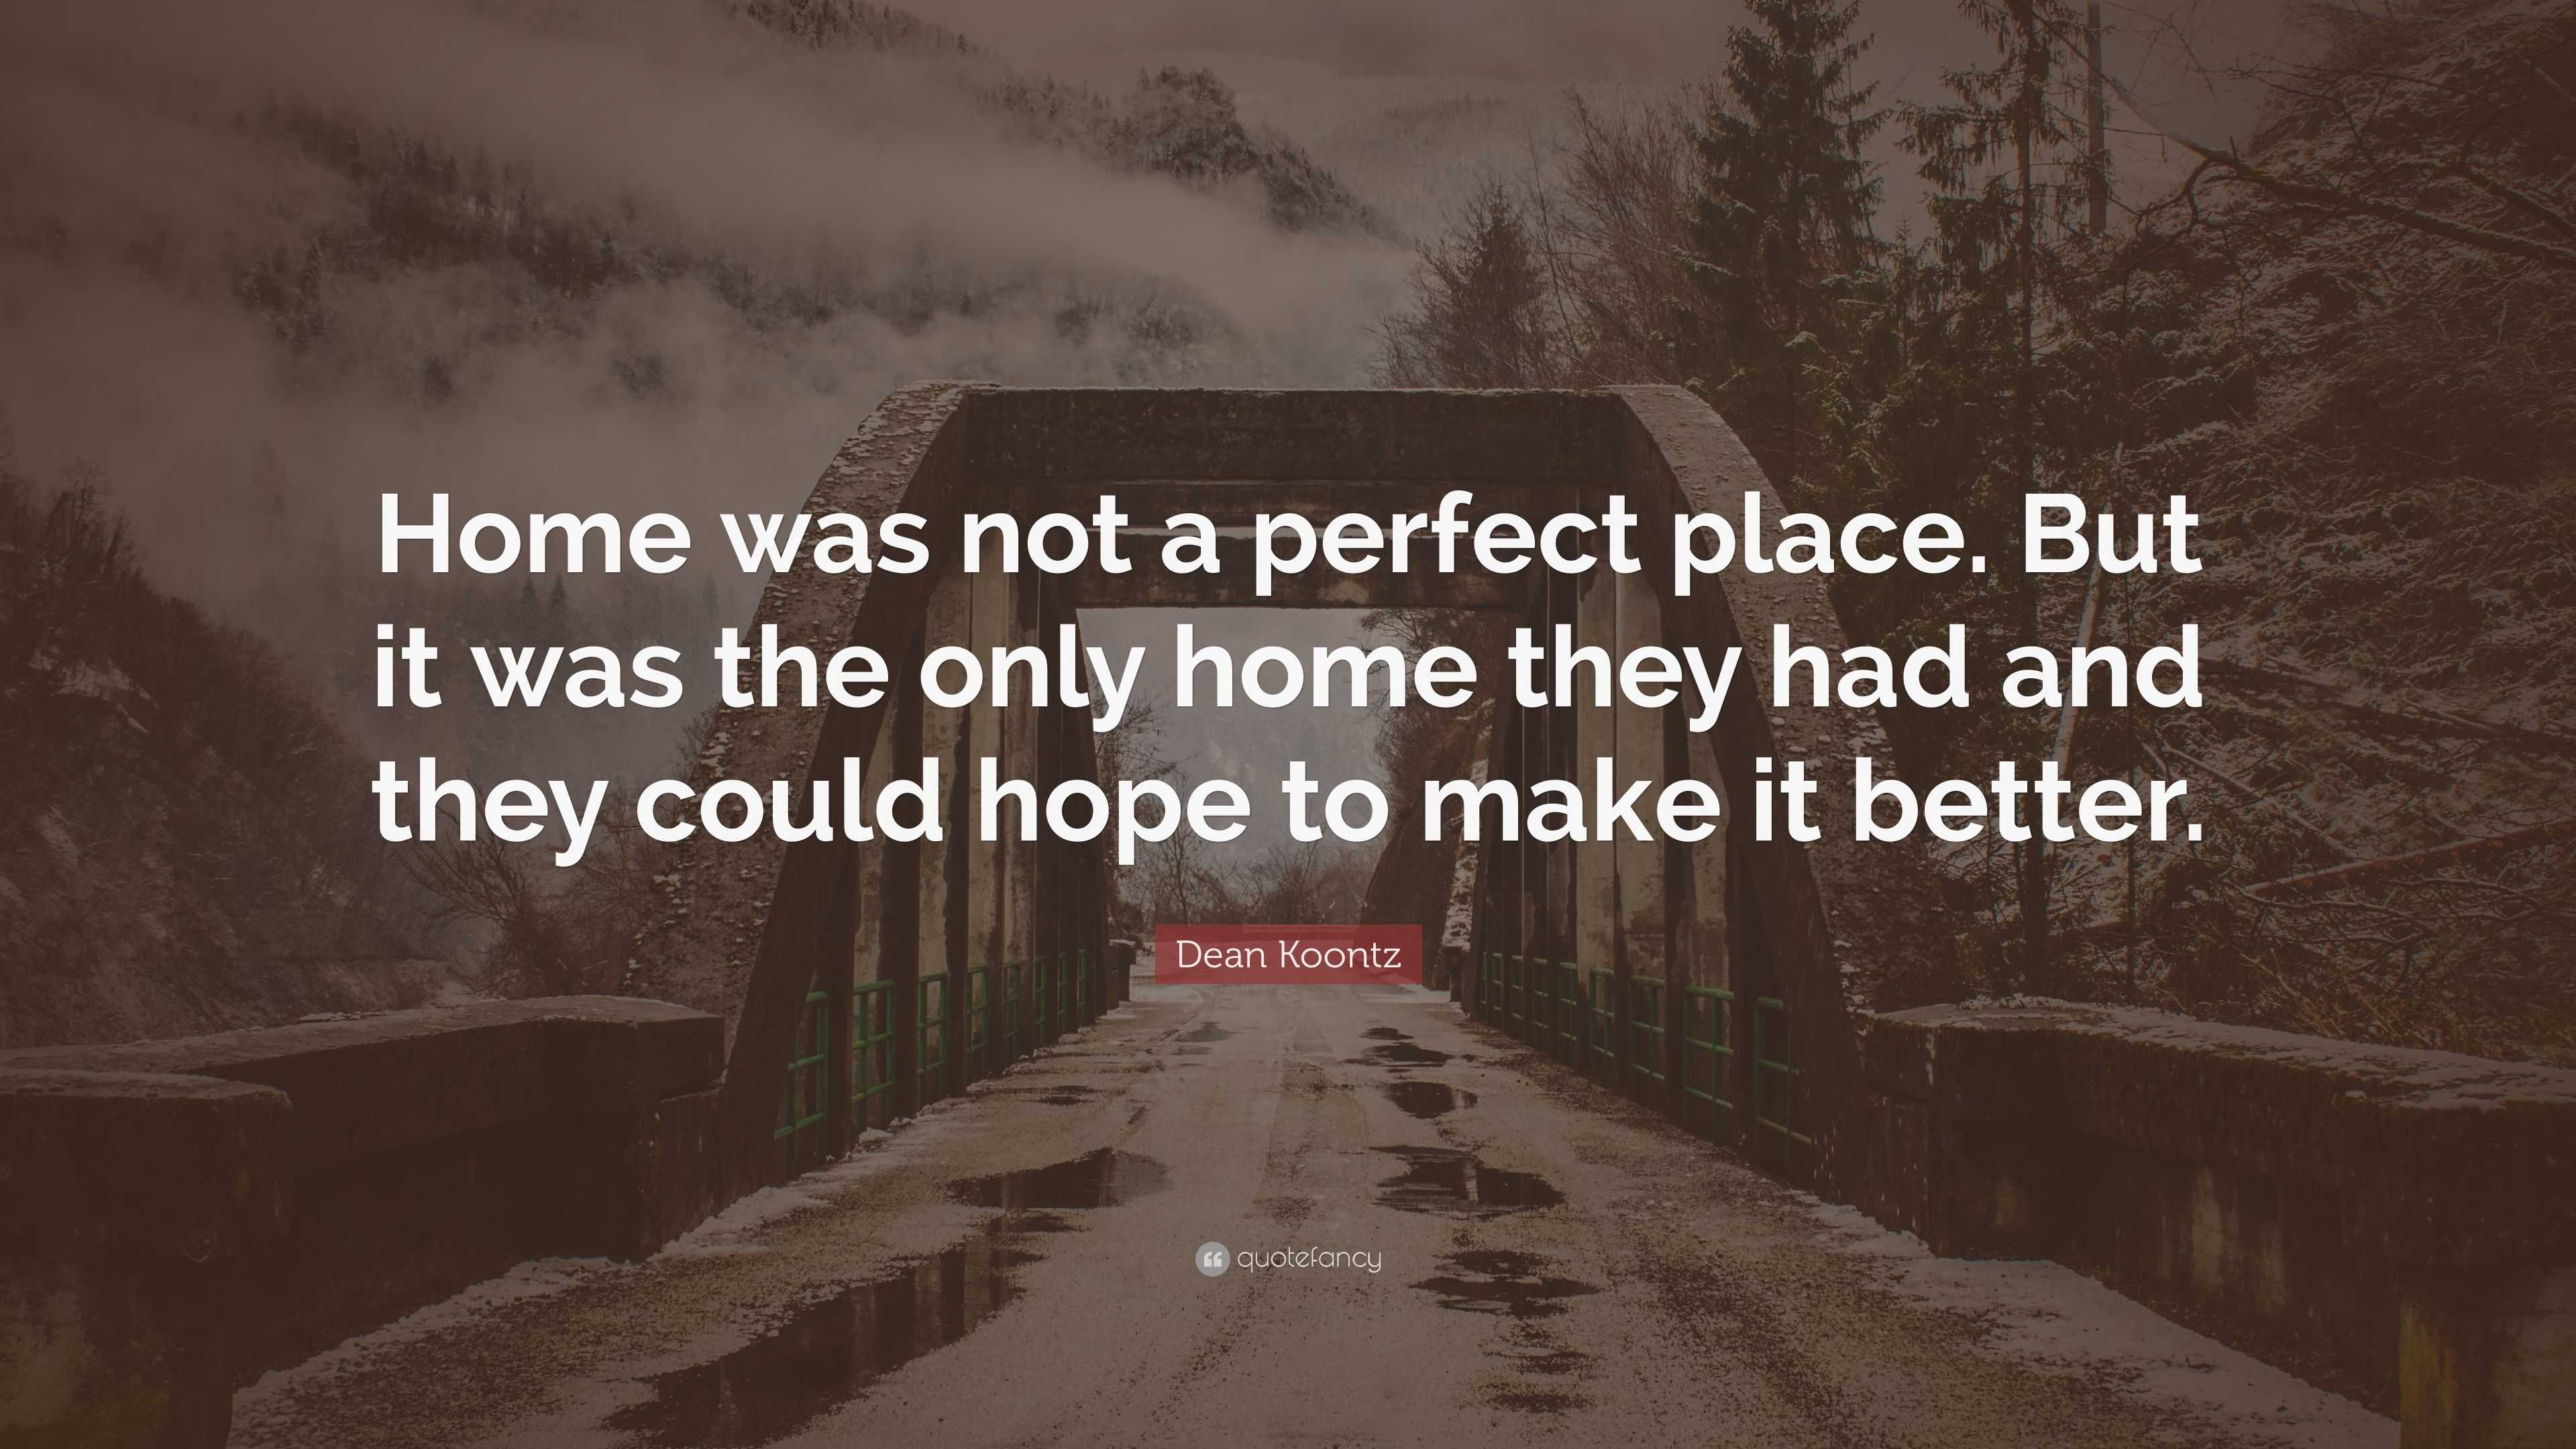 Dean Koontz Quote: “Home was not a perfect place. But it was the only ...